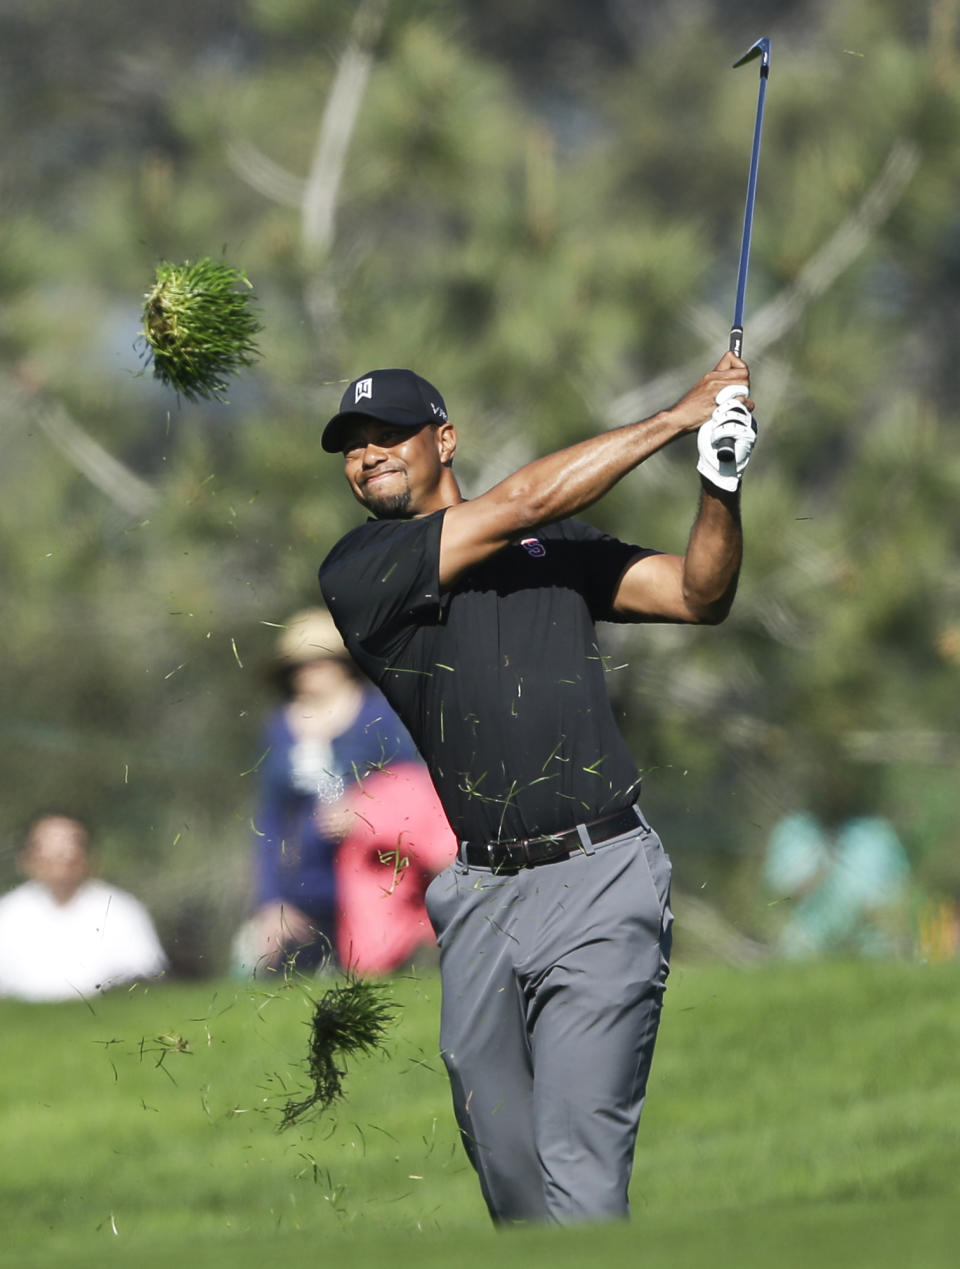 Tiger Woods watches his approach shot on the second hole of the South Course at Torrey Pines during the third round of the Farmers Insurance Open golf tournament Saturday, Jan. 25, 2014, in San Diego. Woods bogeyed the hole. (AP Photo/Lenny Ignelzi)